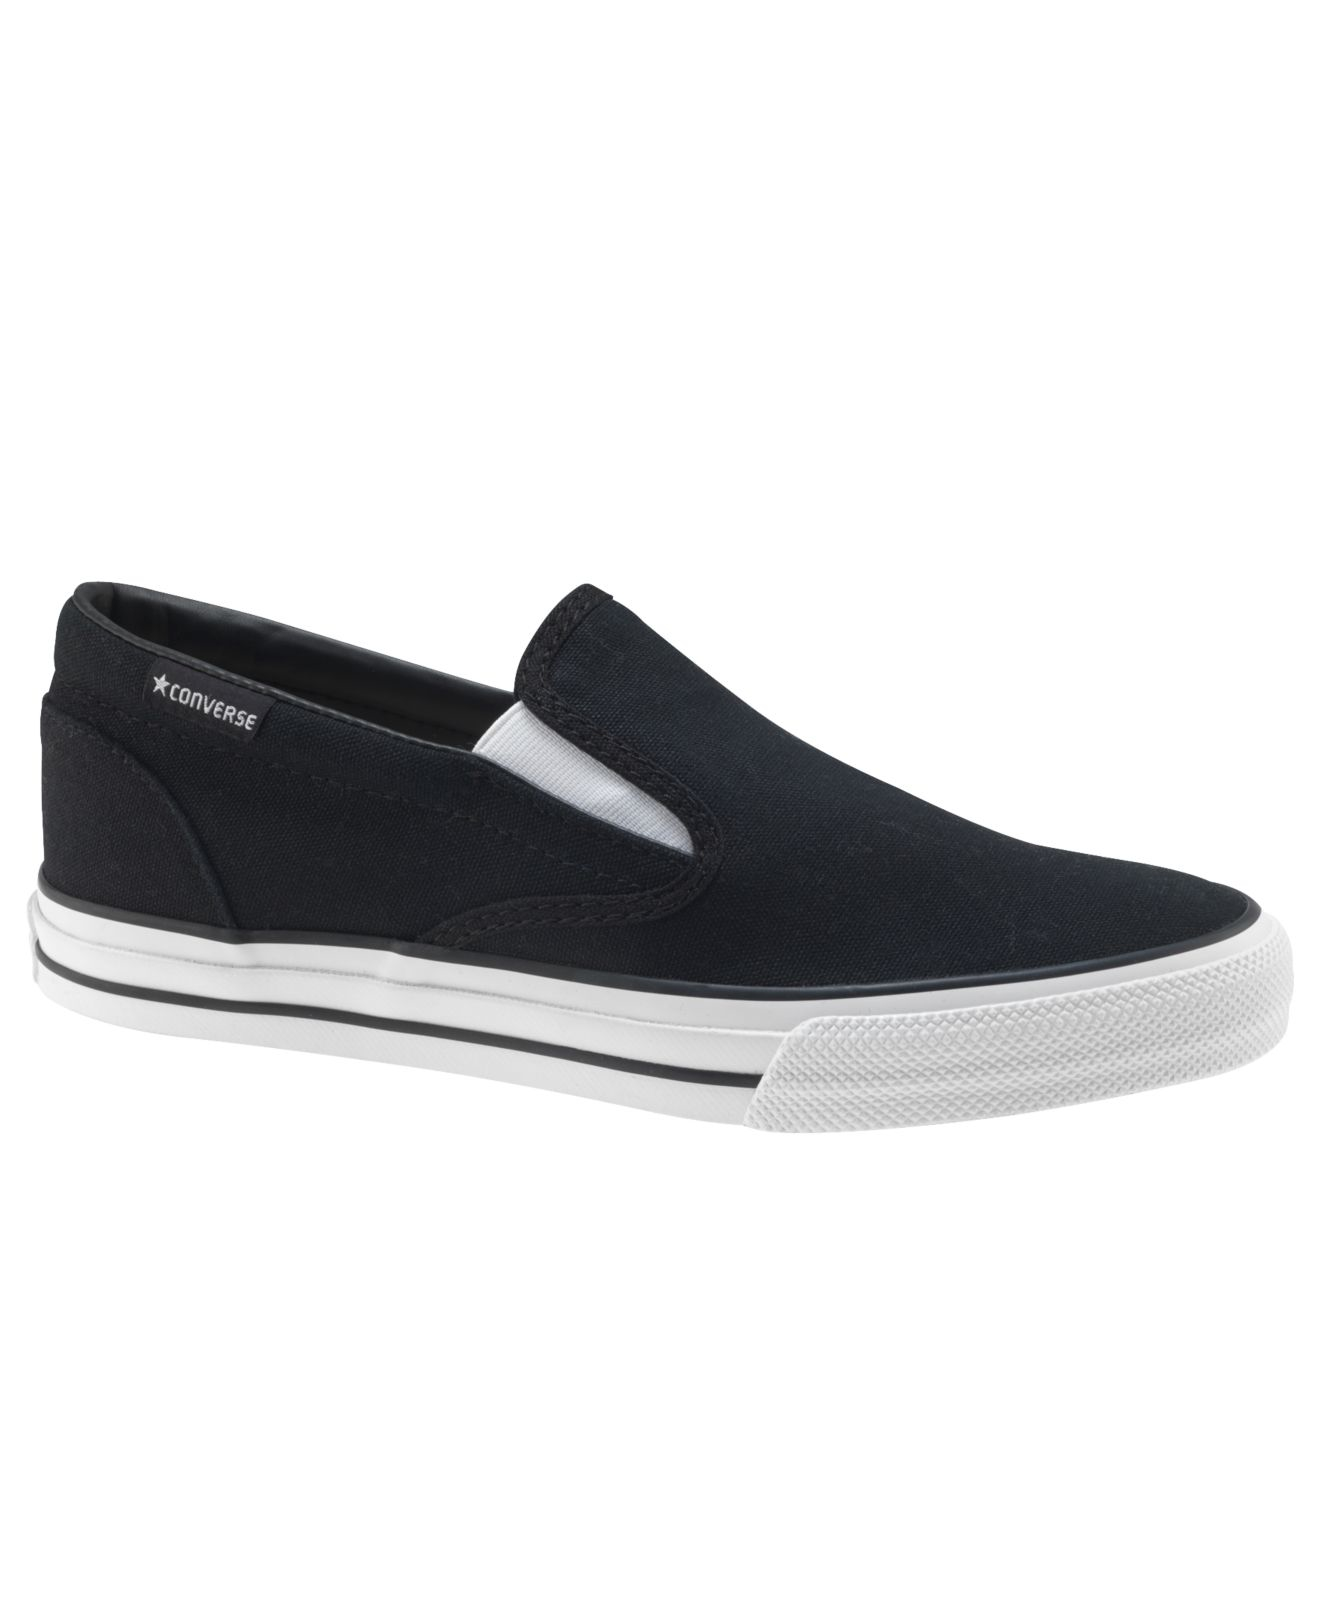 Converse Men's Skid Grip Slip On Sneakers From Finish Line in Black for ...